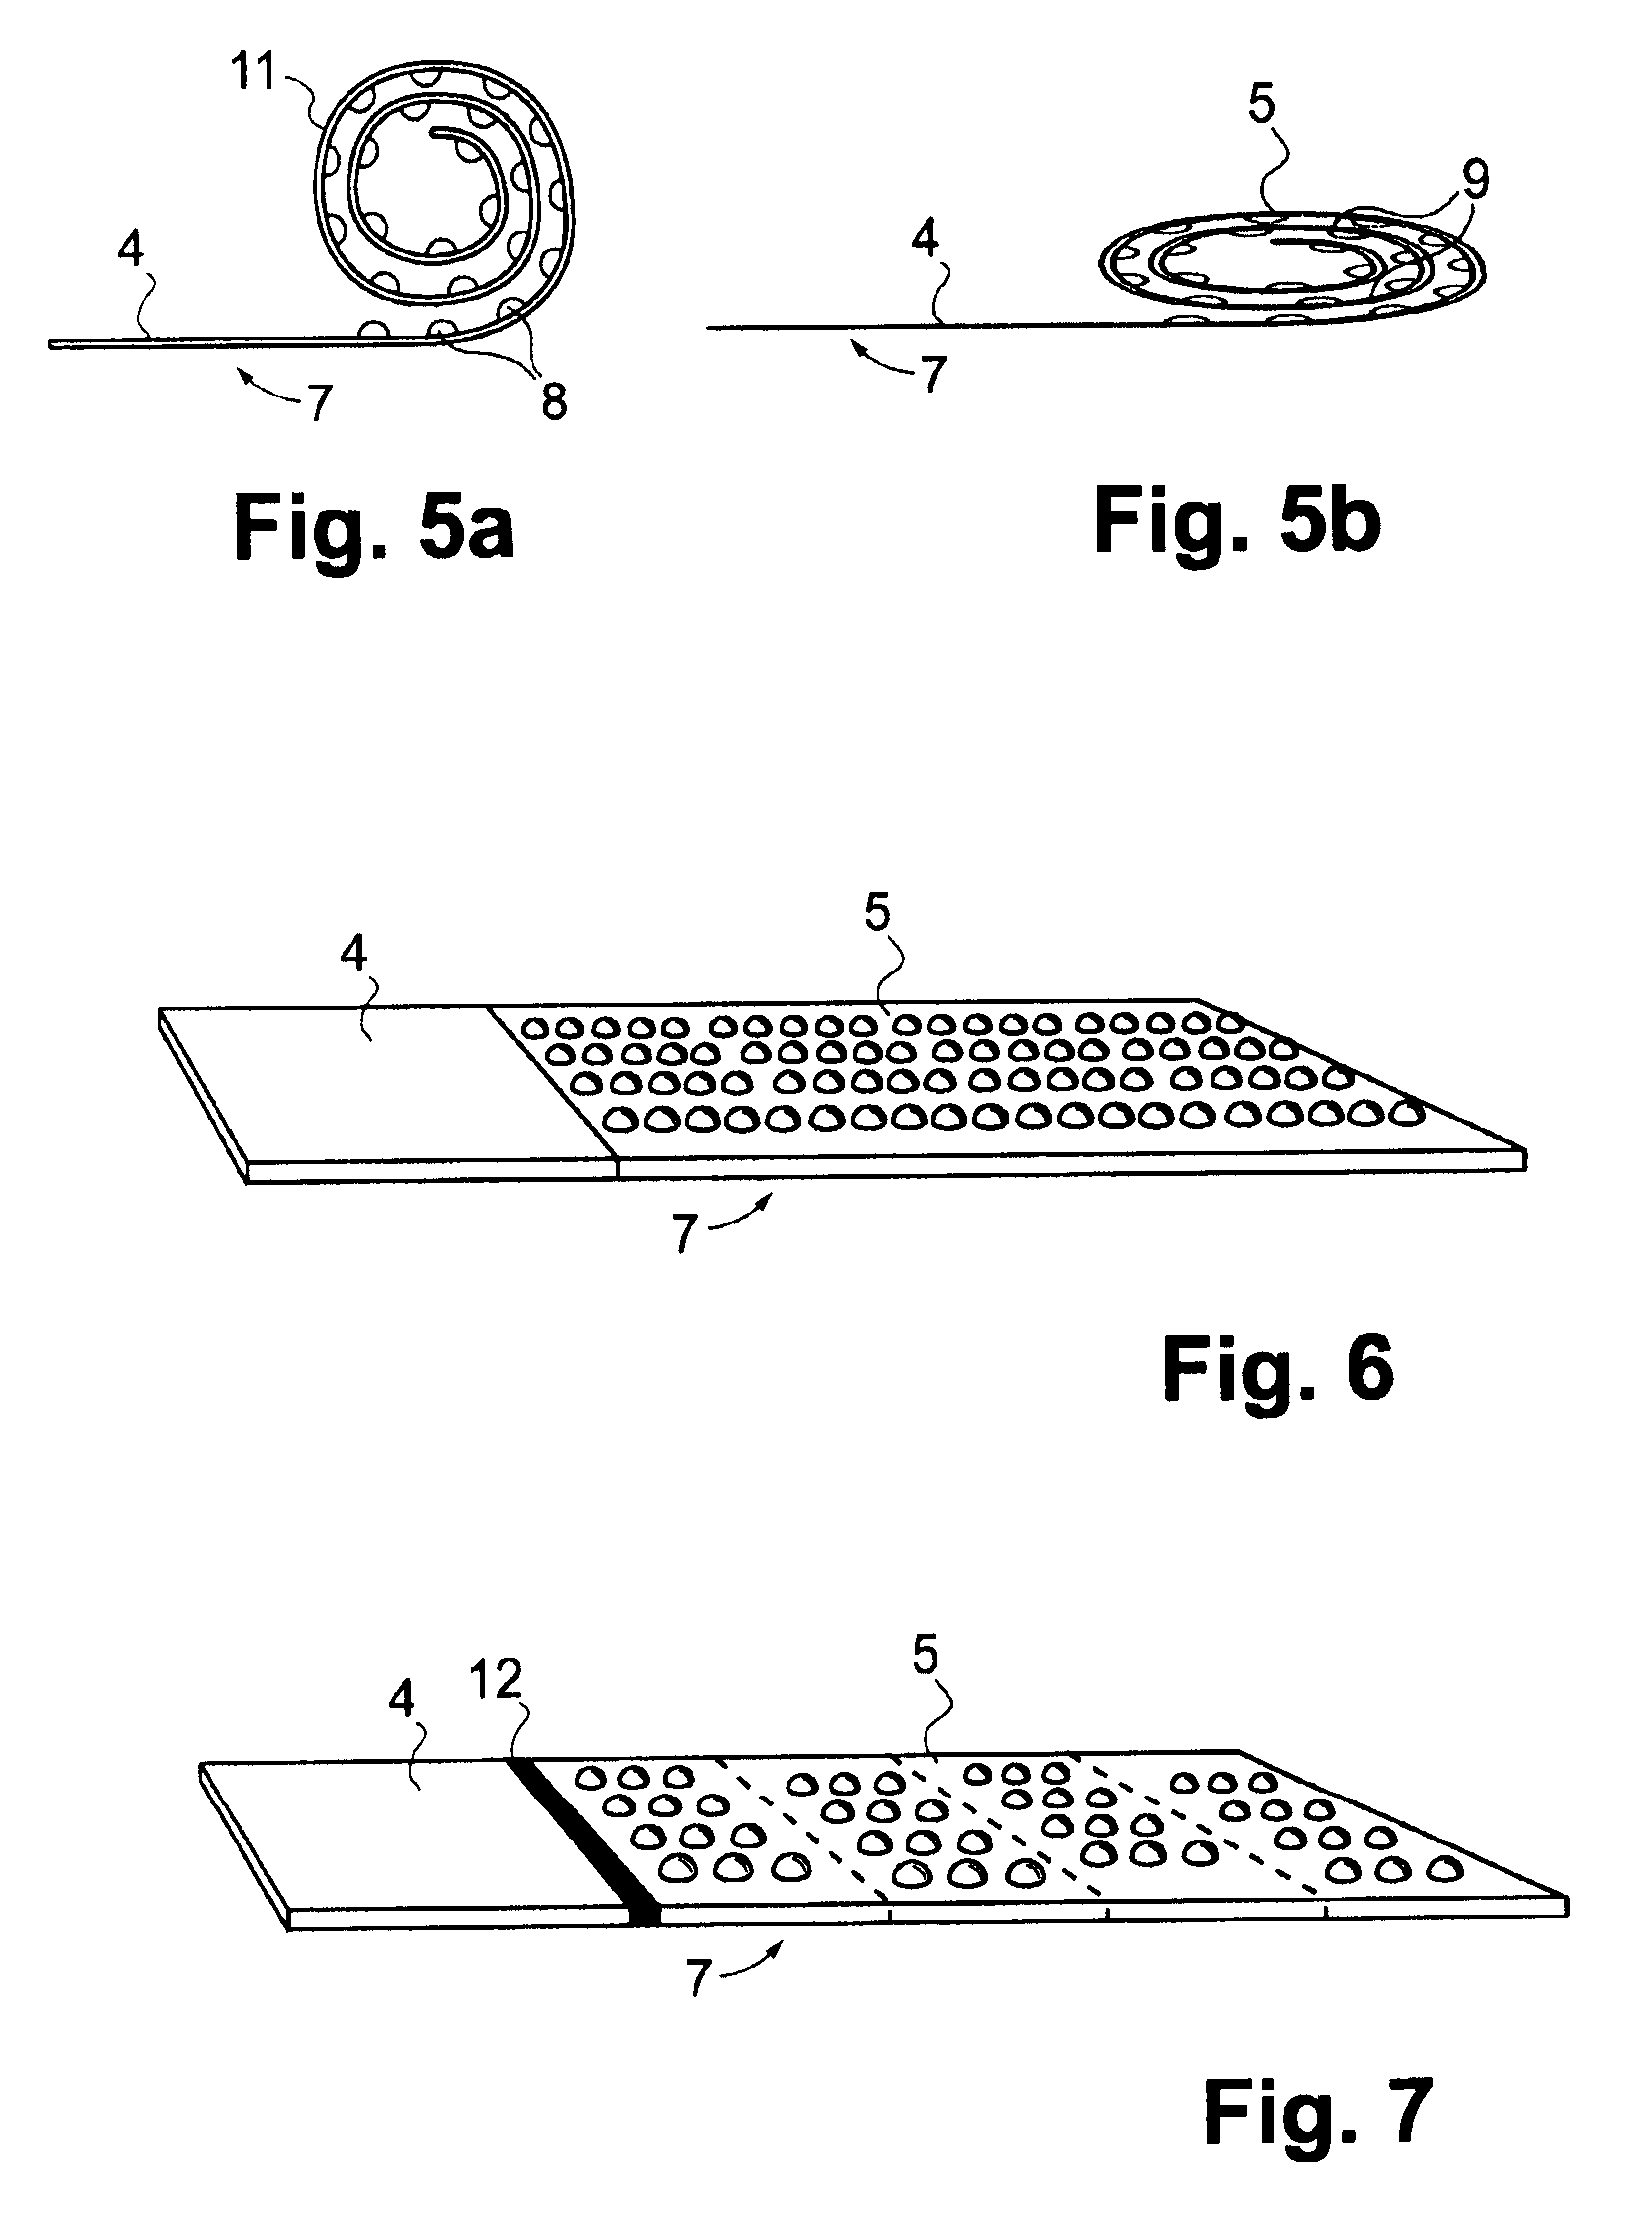 Lateral flow assay test strip and method of making the same